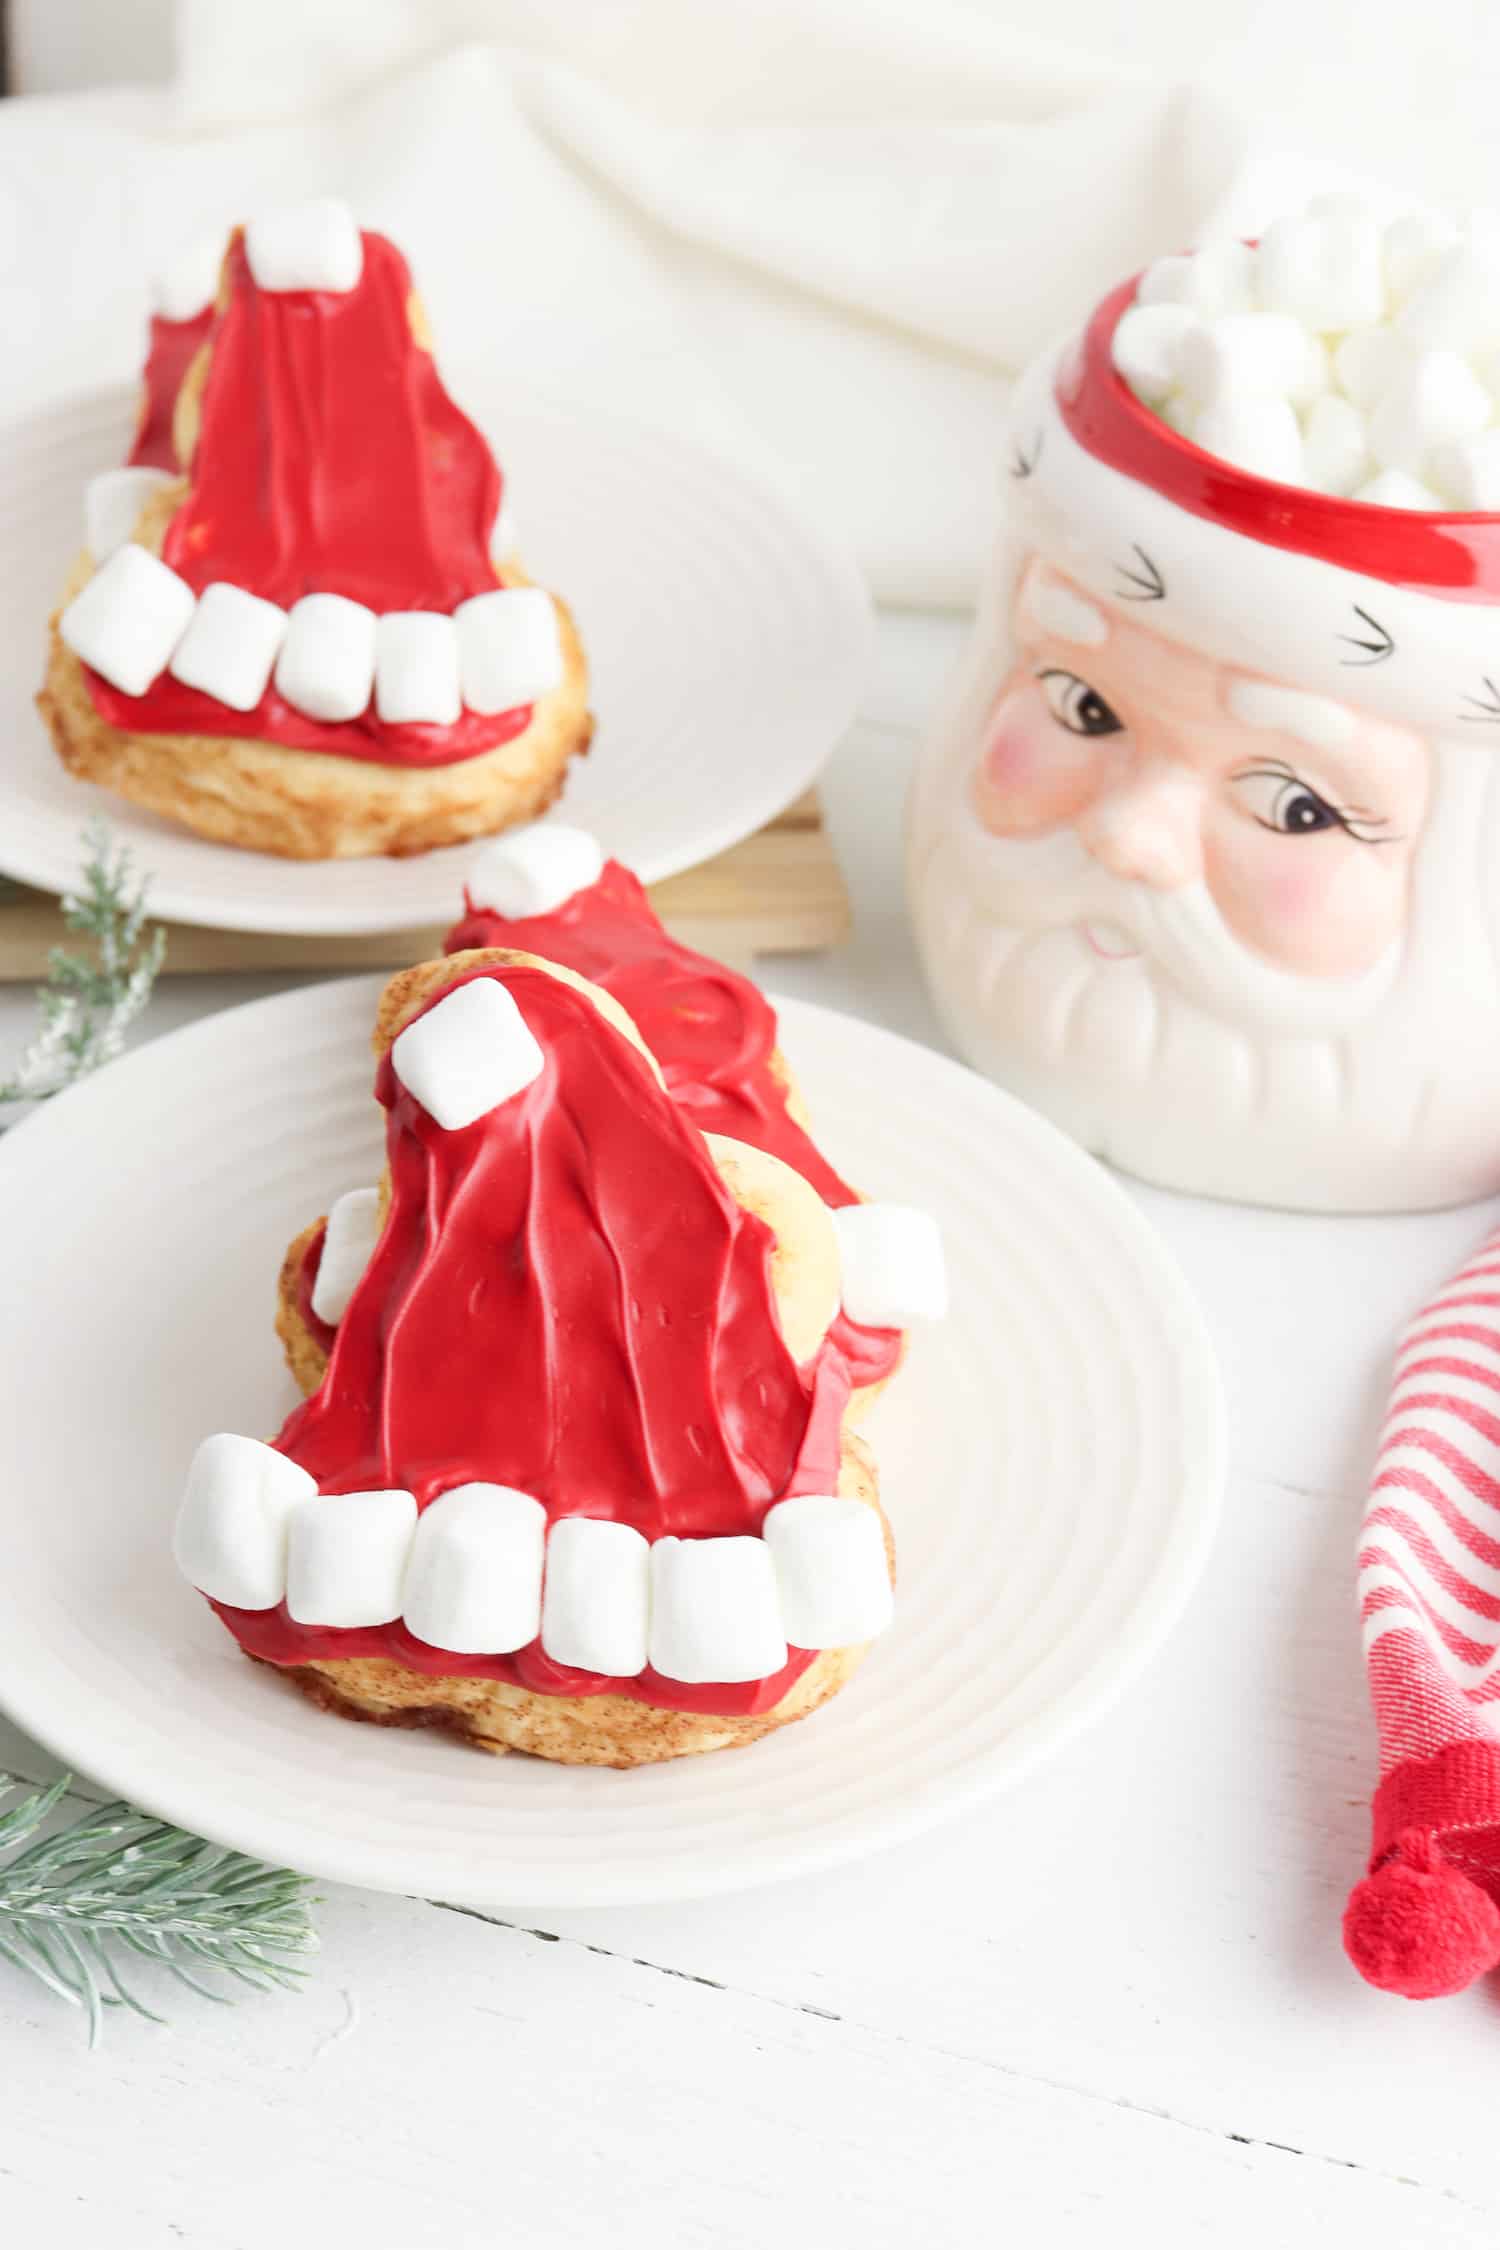 Christmas morning cinnamon rolls in the shape of a Santa hat